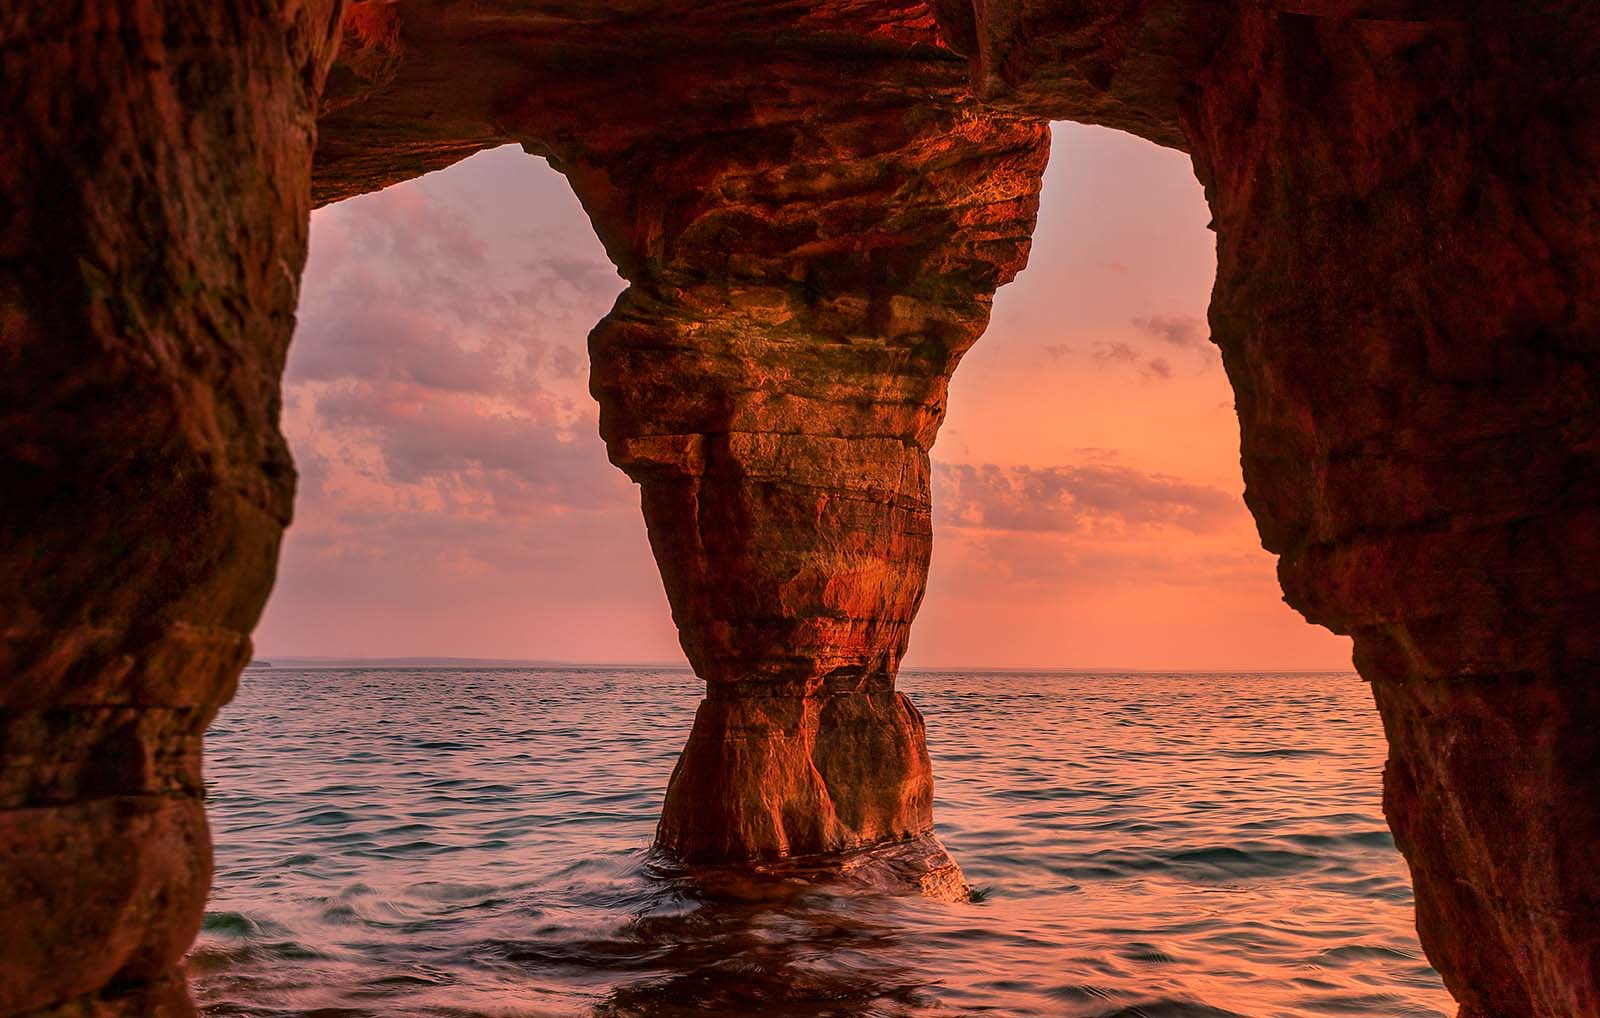 sunset from a sea cave with pillar on devil's island in the apostle islands national lakeshore